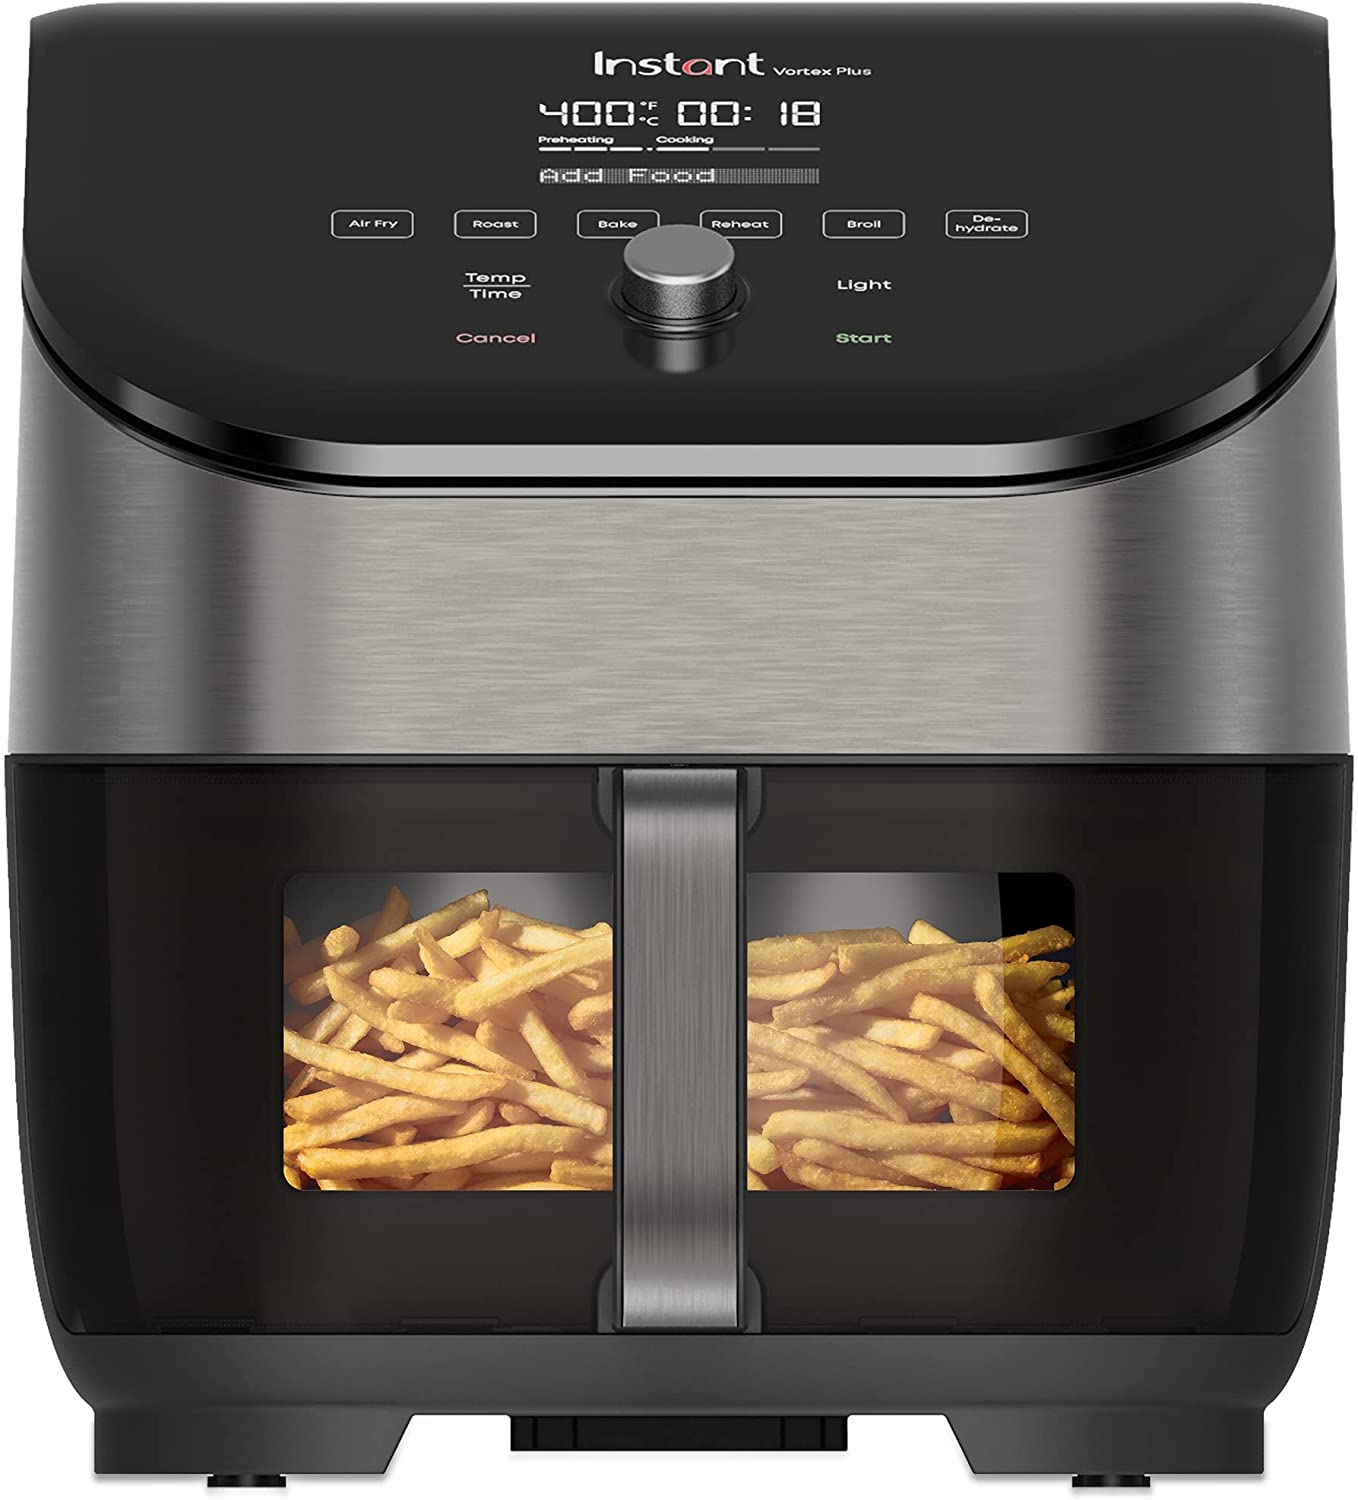 https://discounttoday.net/wp-content/uploads/2023/01/Instant-Vortex-Plus-6-Quart-Air-Fryer-Oven-From-the-Makers-of-Instant-Pot-with-Odor-Erase-Technology-ClearCook-Cooking-Window-App-with-over-100-Recipes-Single-Basket-Stainless-Steel.jpg